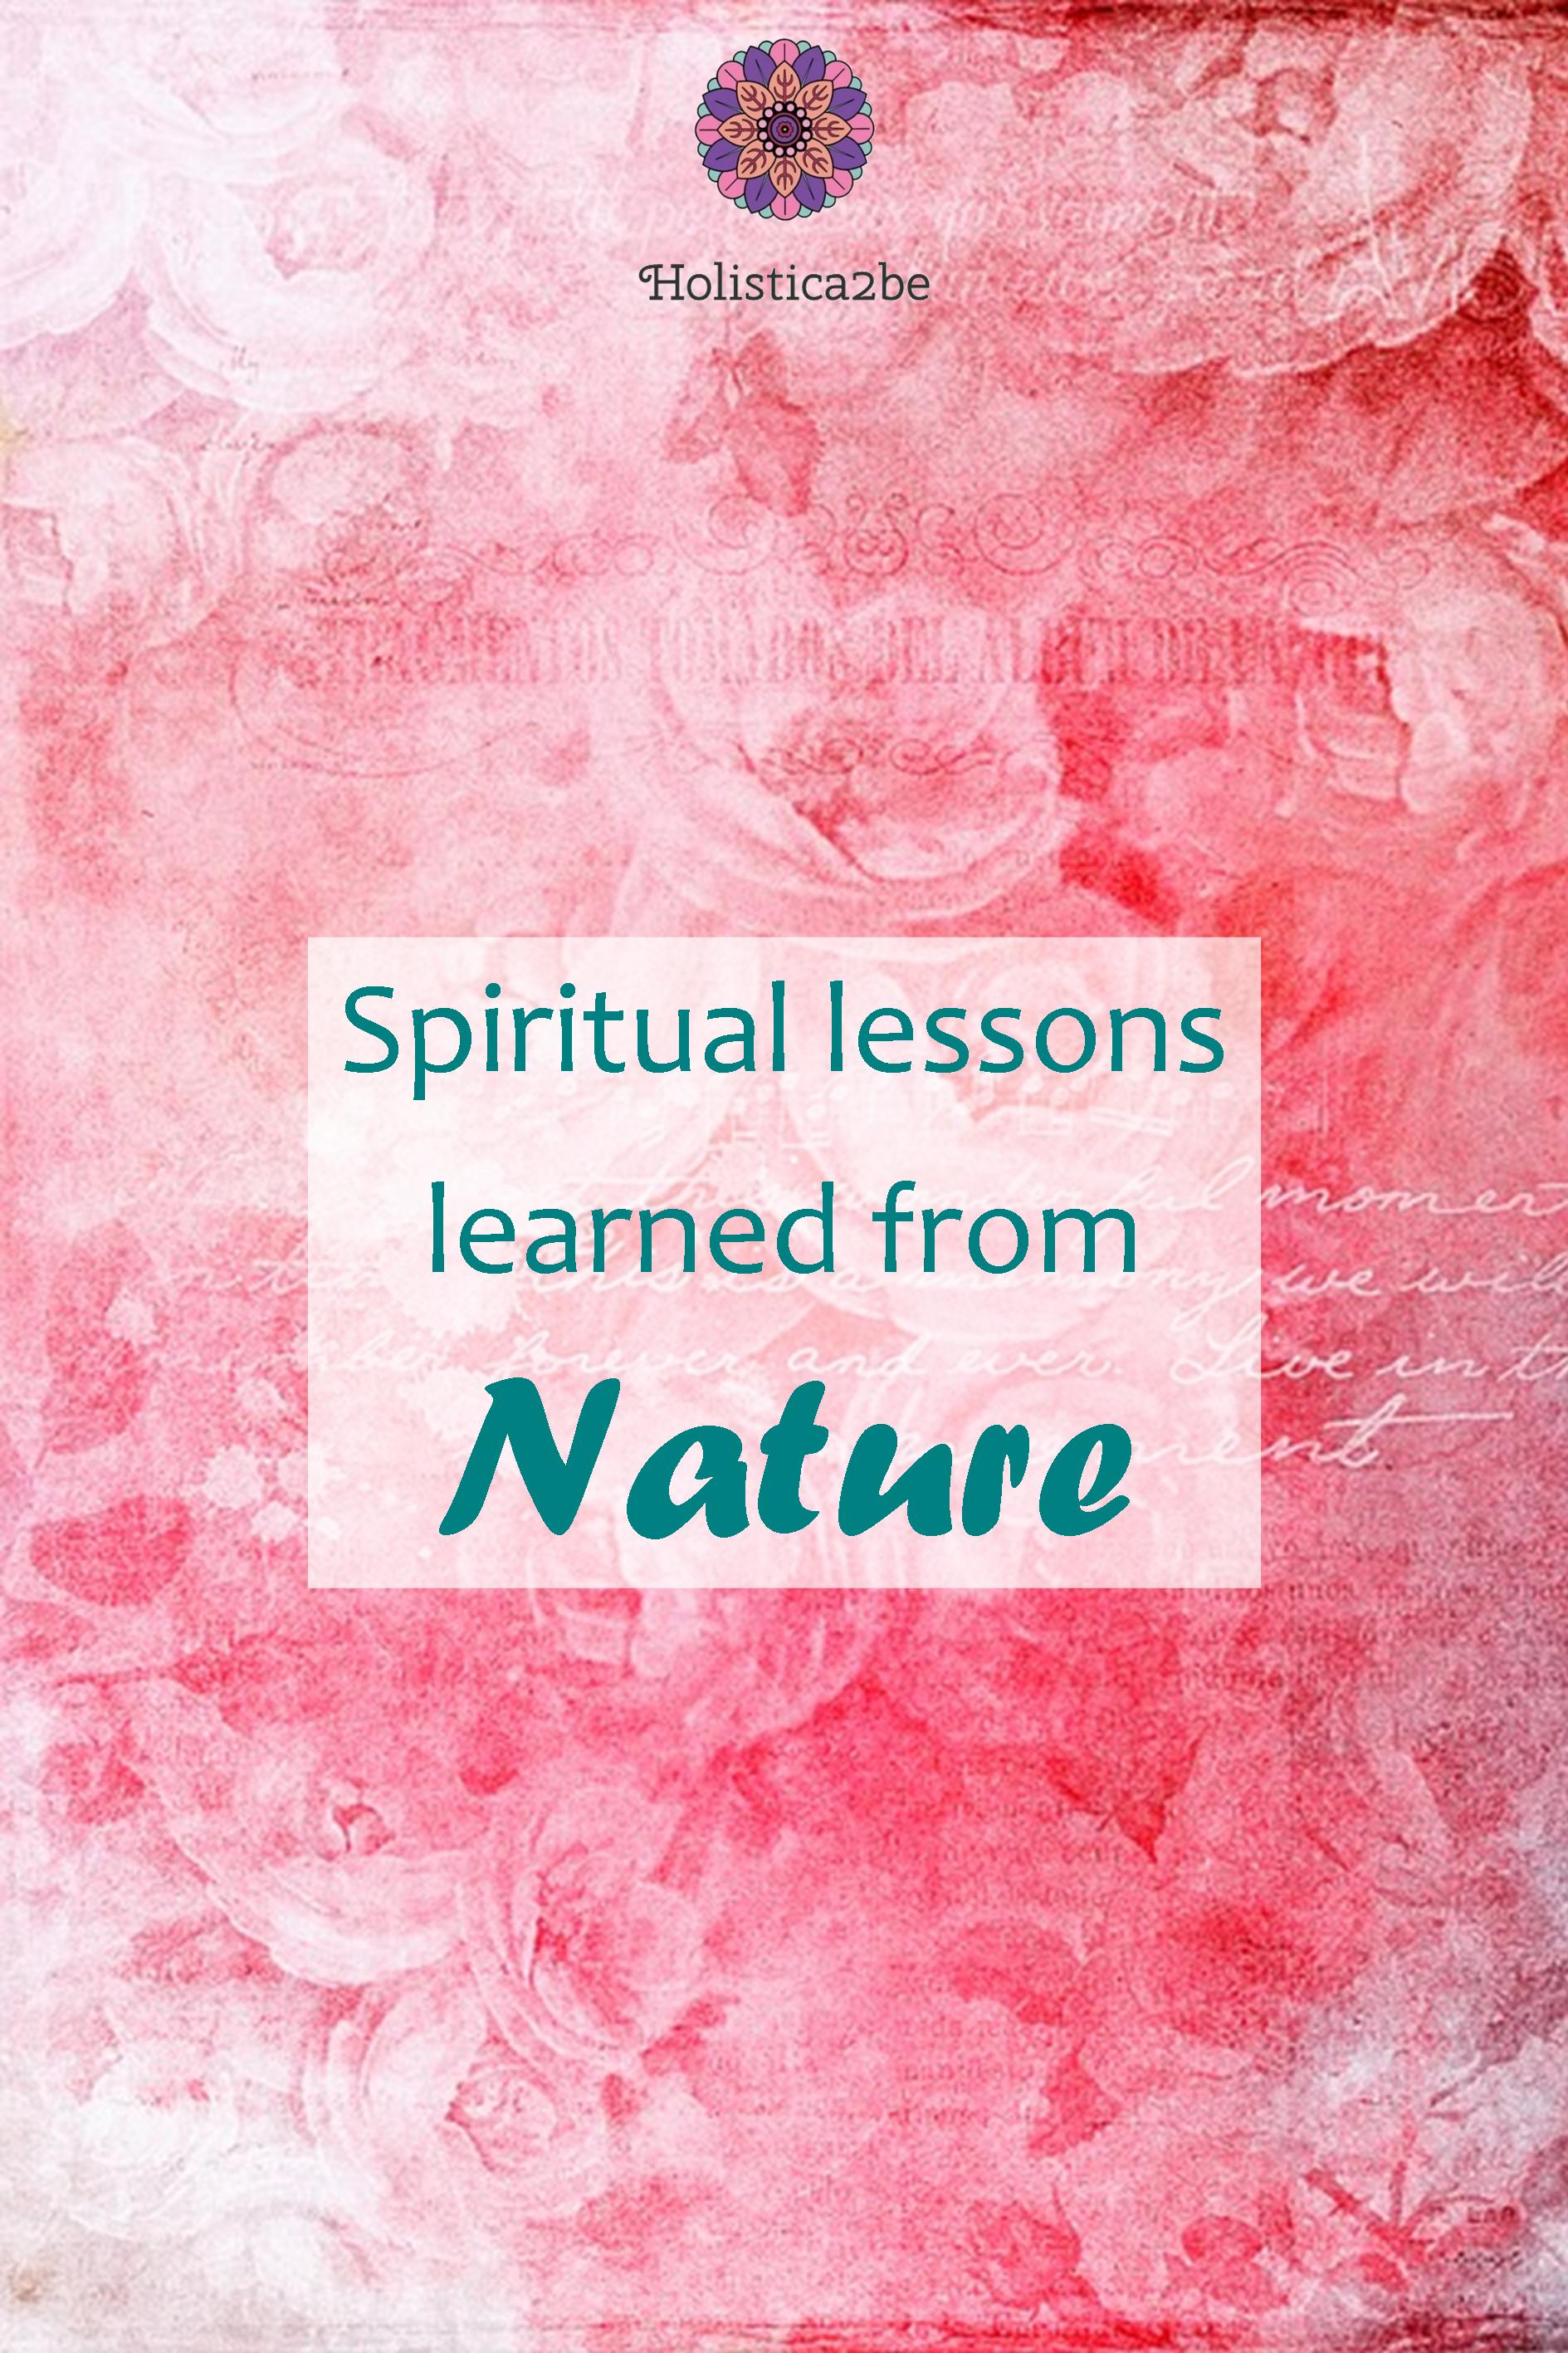 Spiritual lessons learned from Nature